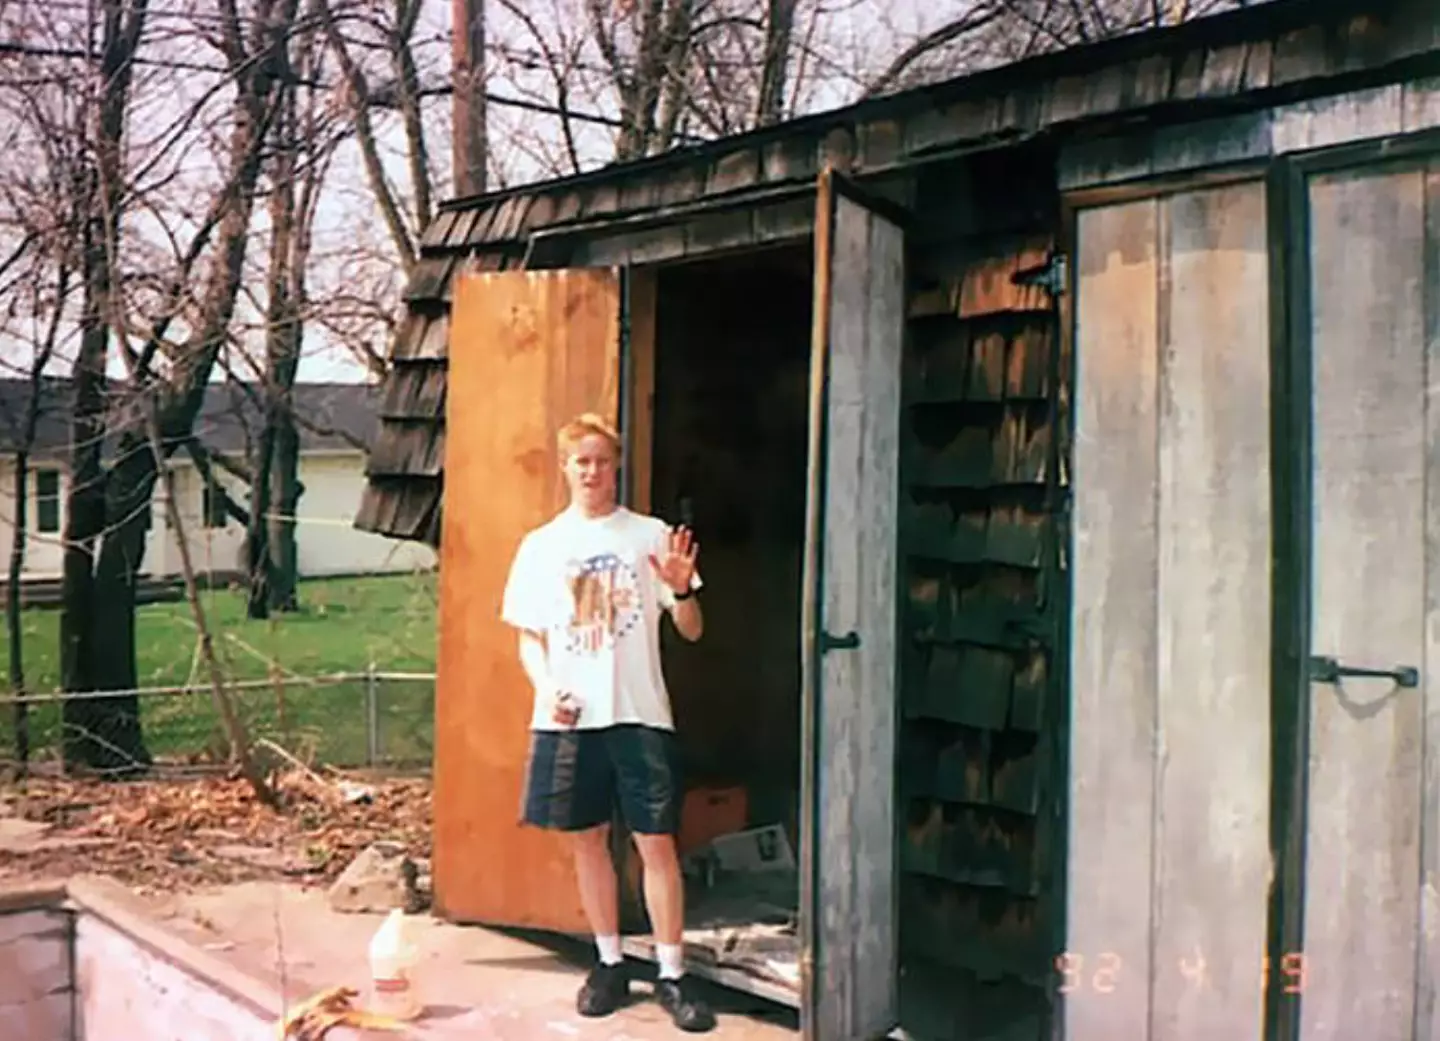 Hahn built the reactor in his mother's shed.